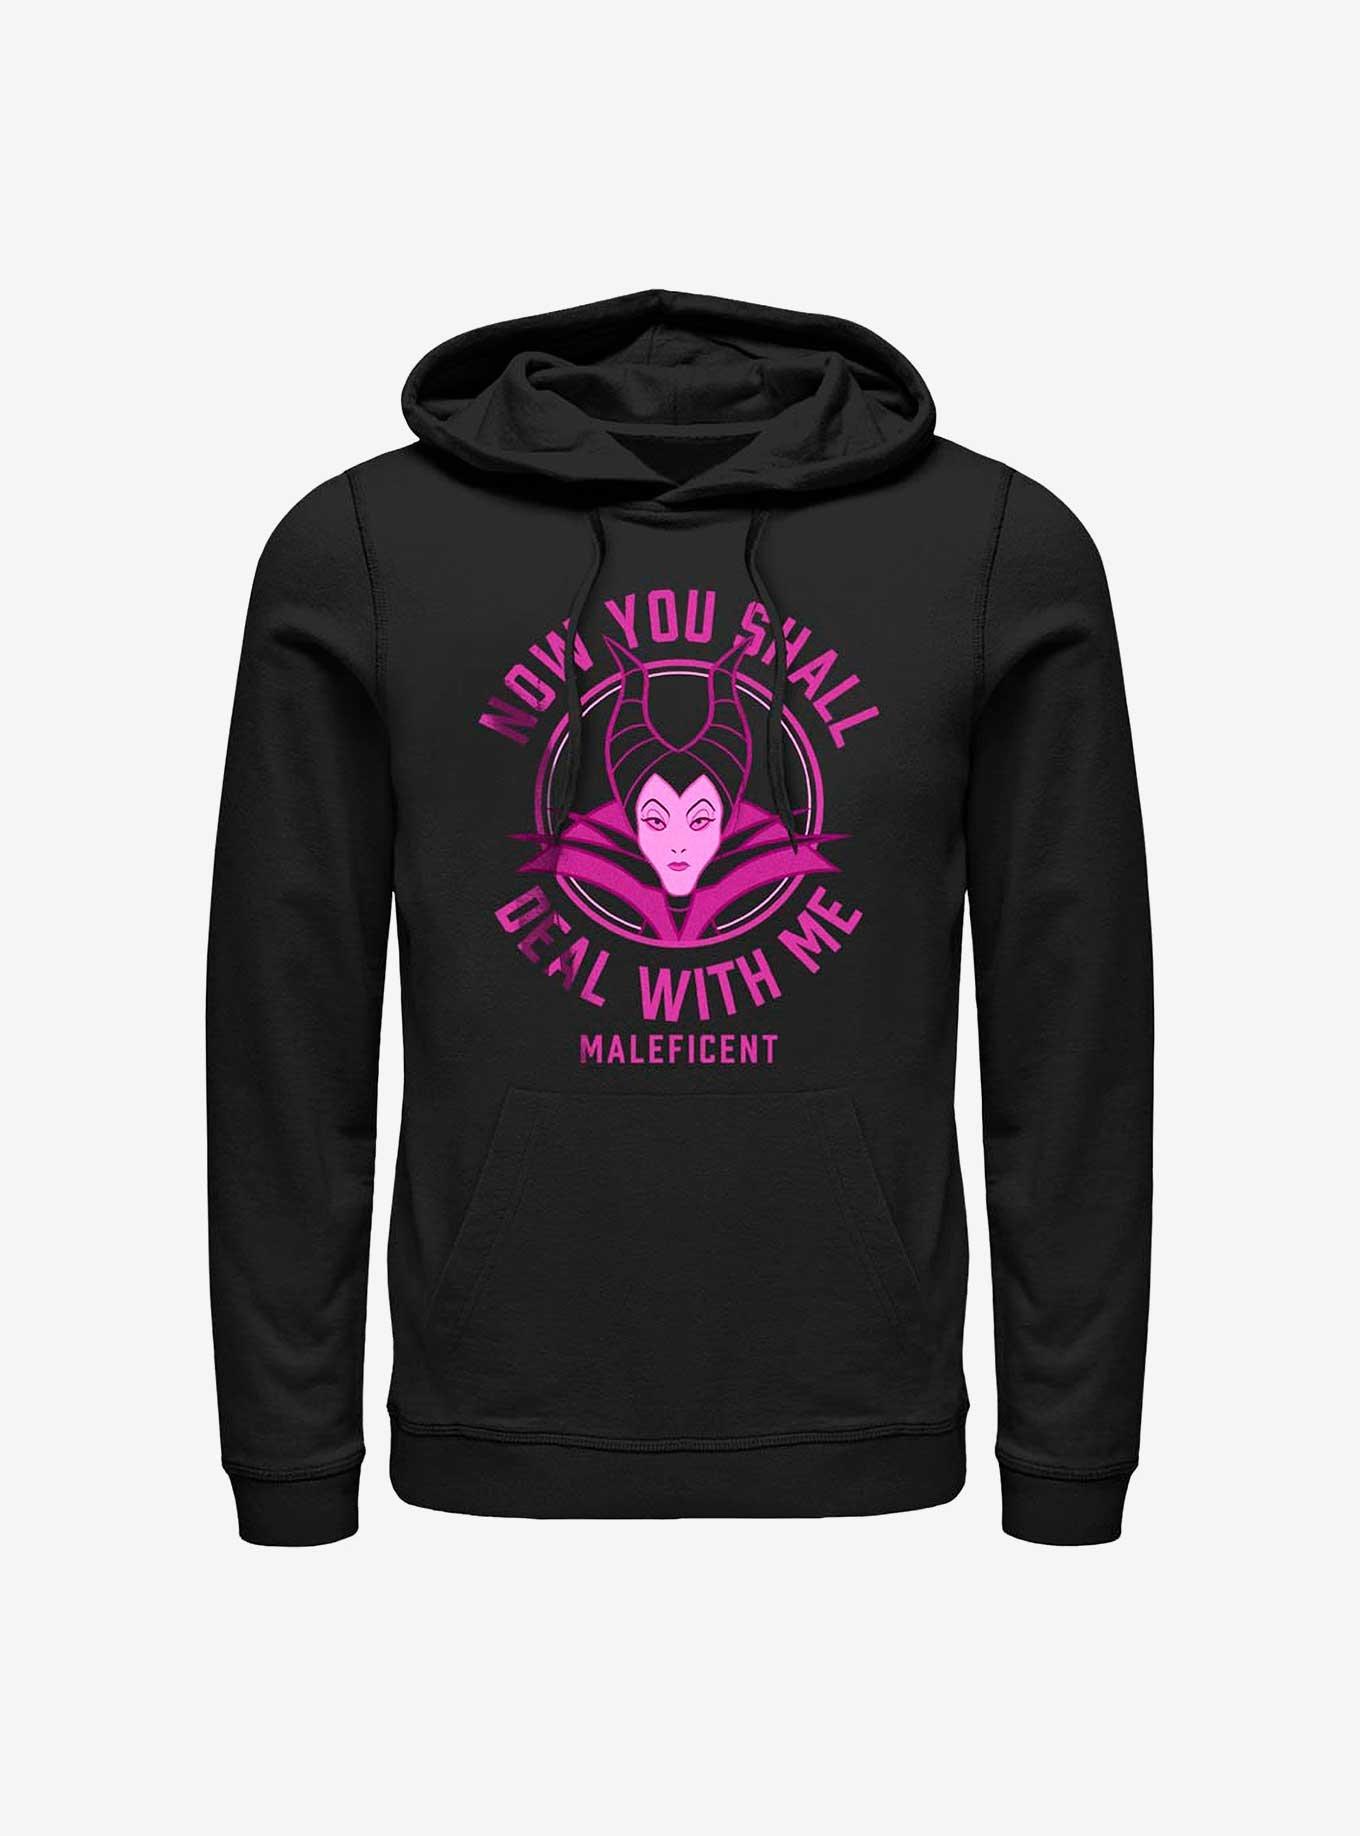 Disney Villains Now You Should Deal With Me Maleficent Hoodie, , hi-res